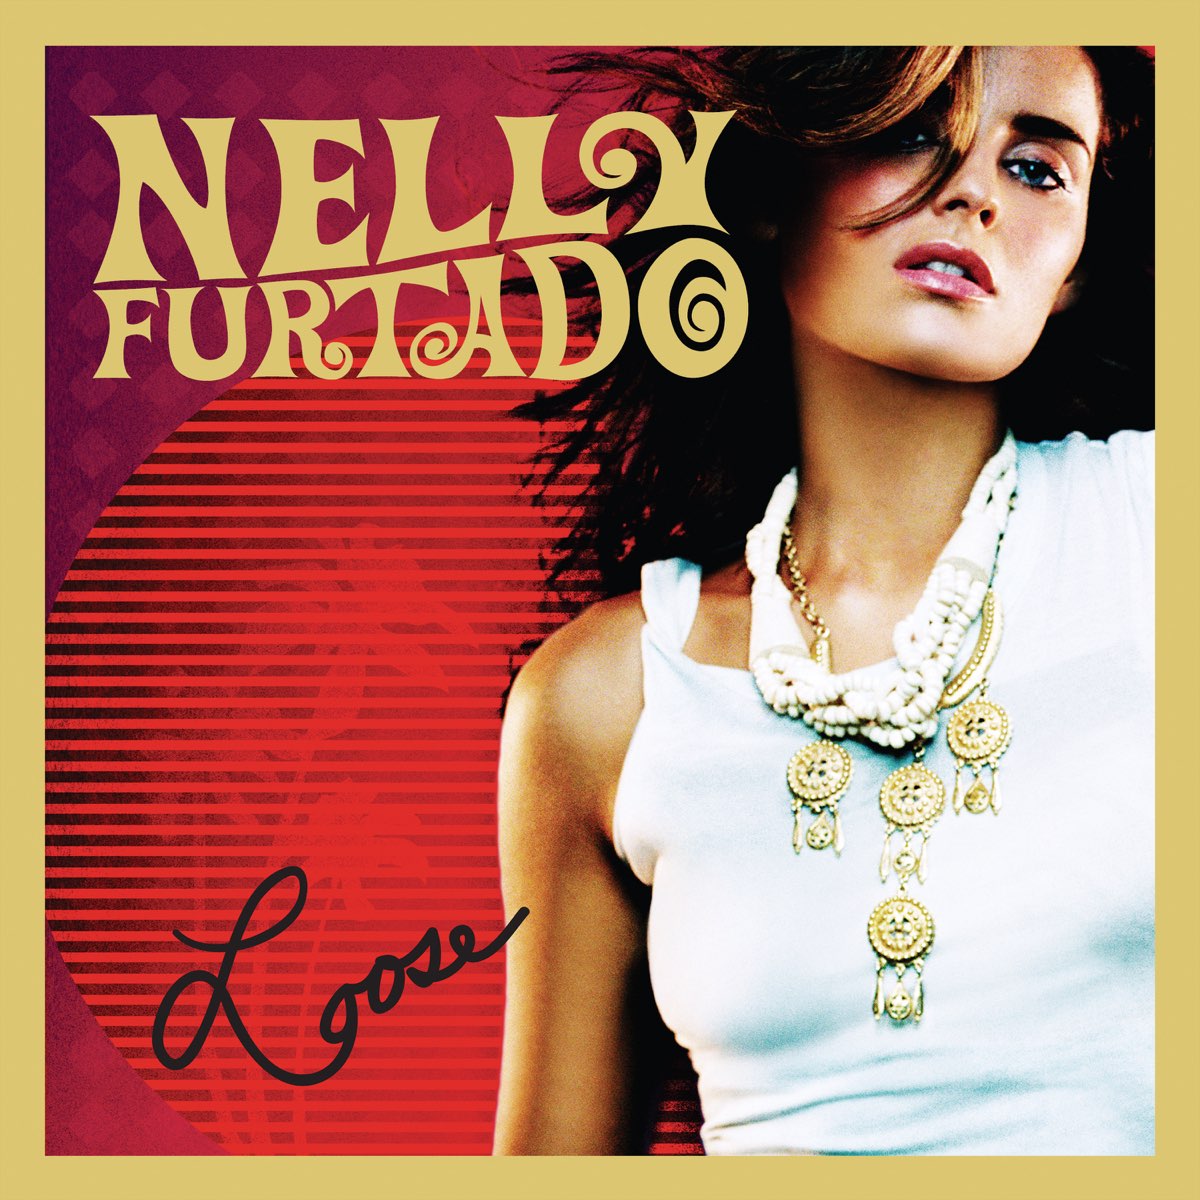 Loose (Expanded Edition) by Nelly Furtado on Apple Music